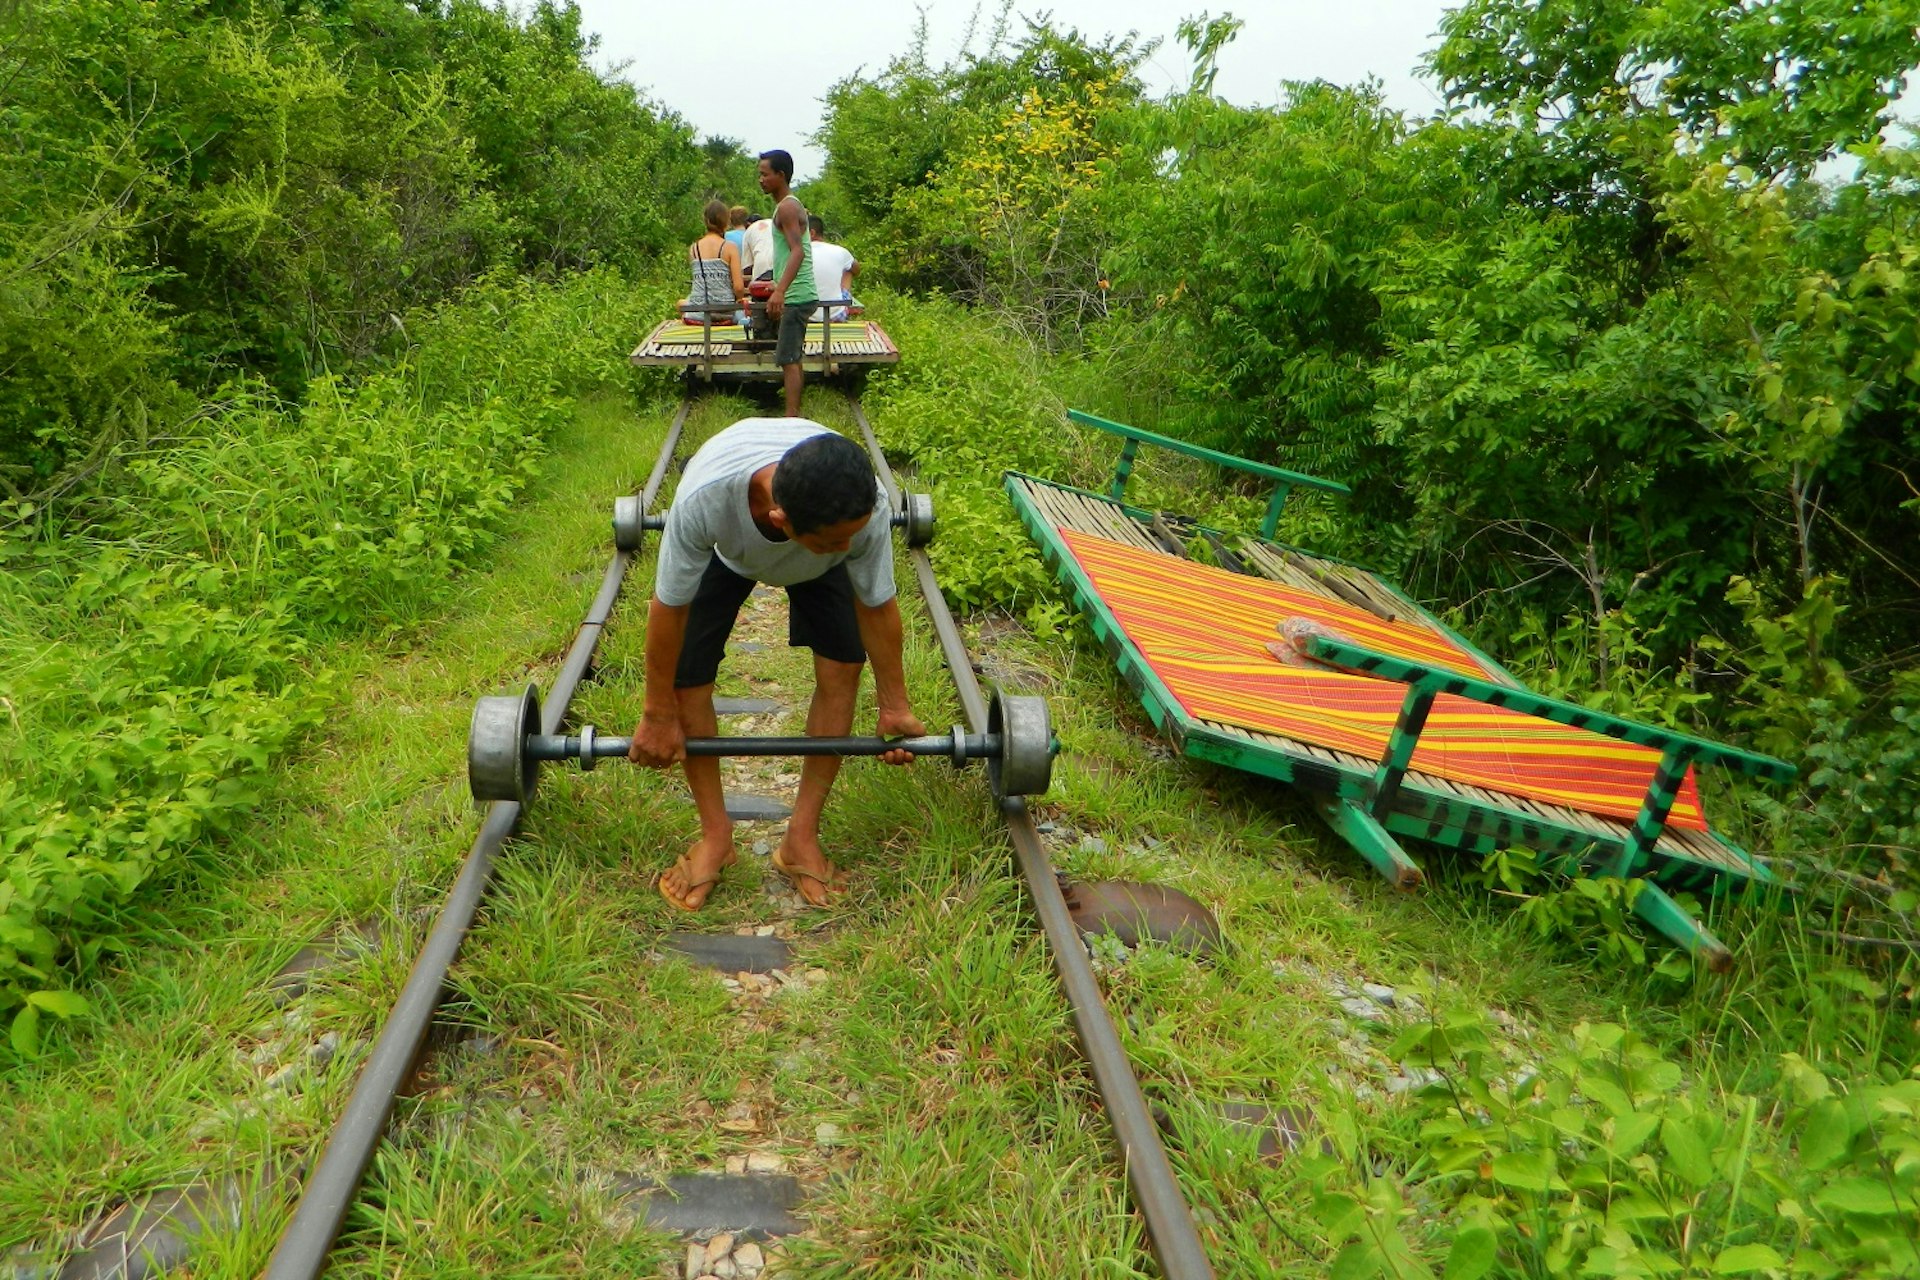 Riding the bamboo train